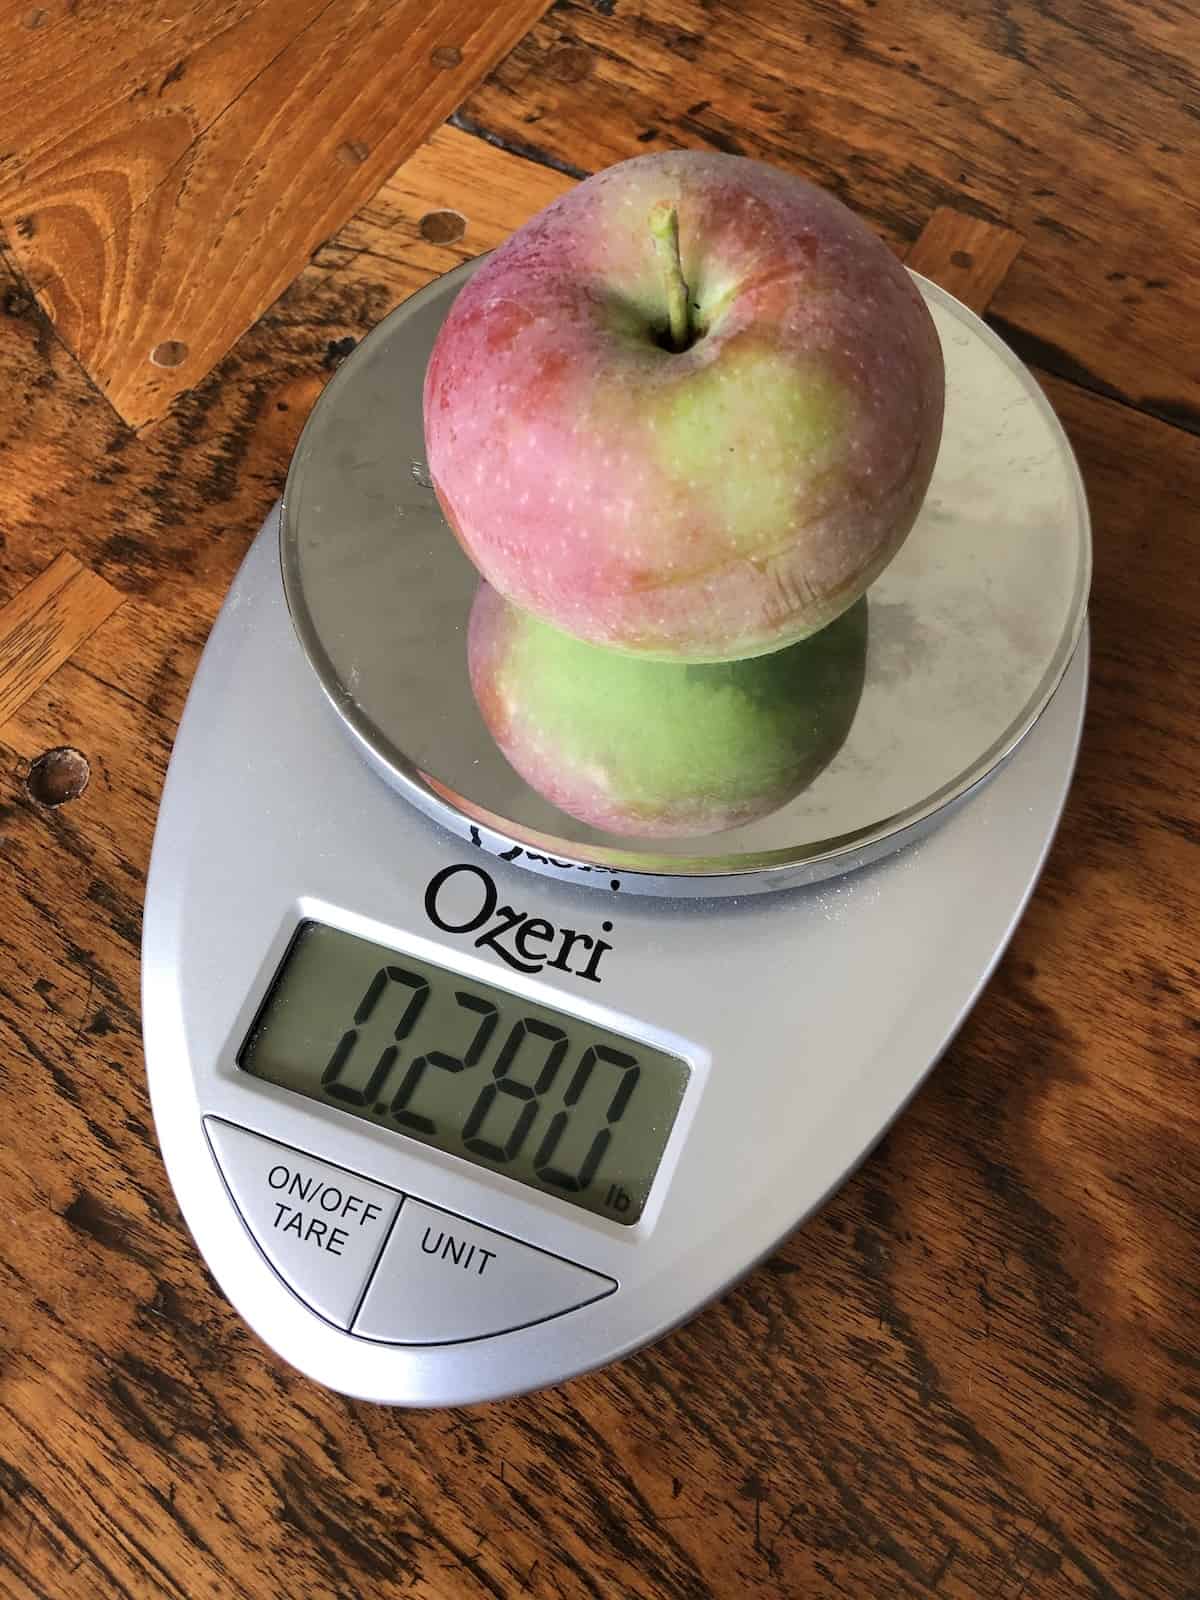 Weighing a mcintosh apple